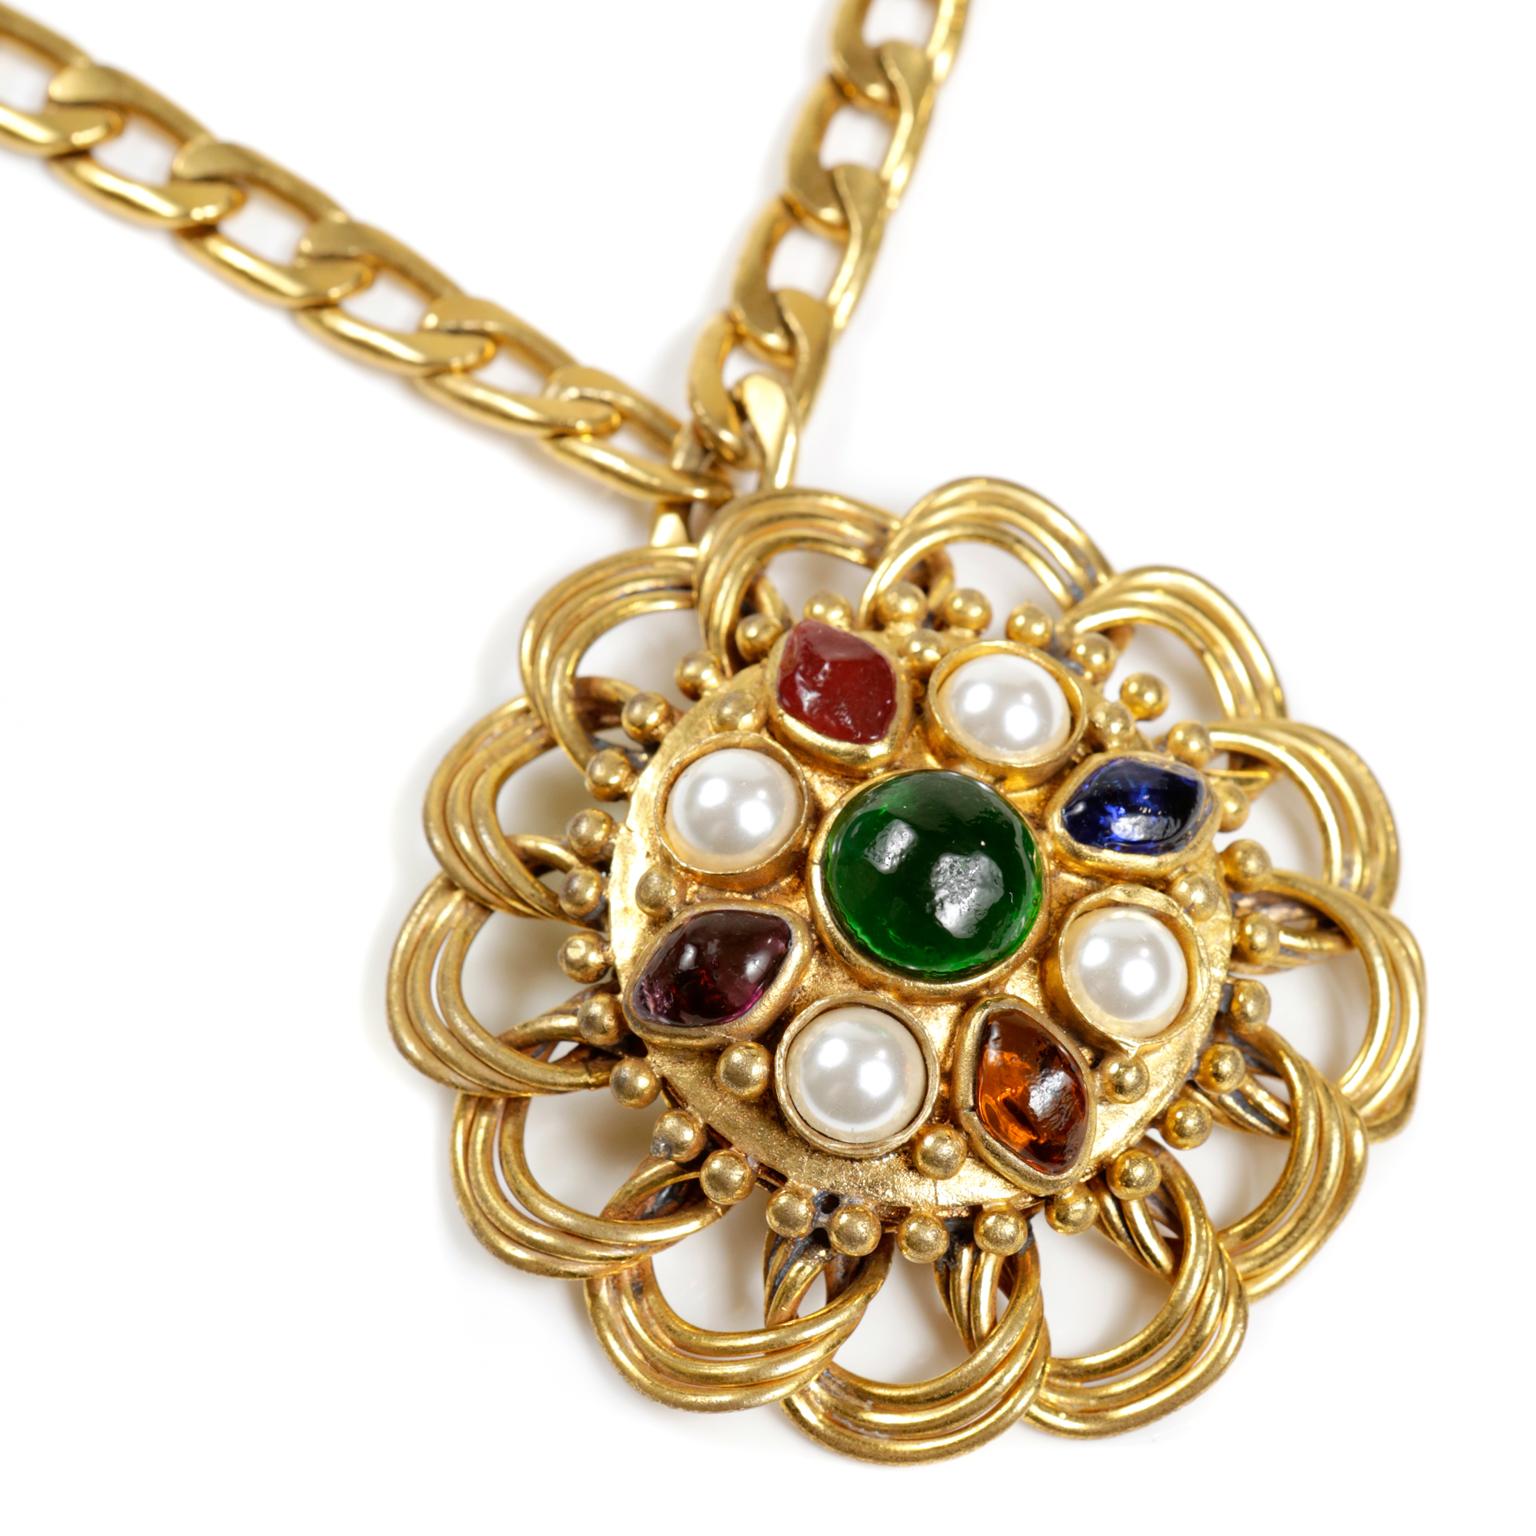 Chanel Gripoix Medallion Necklace- excellent condition
 A rare piece from the 1970’s, it is brilliant addition to any collection. 
Gold tone large medallion with Gripoix glass stones and faux pearl embellishments.  Gold tone linked chain with hook